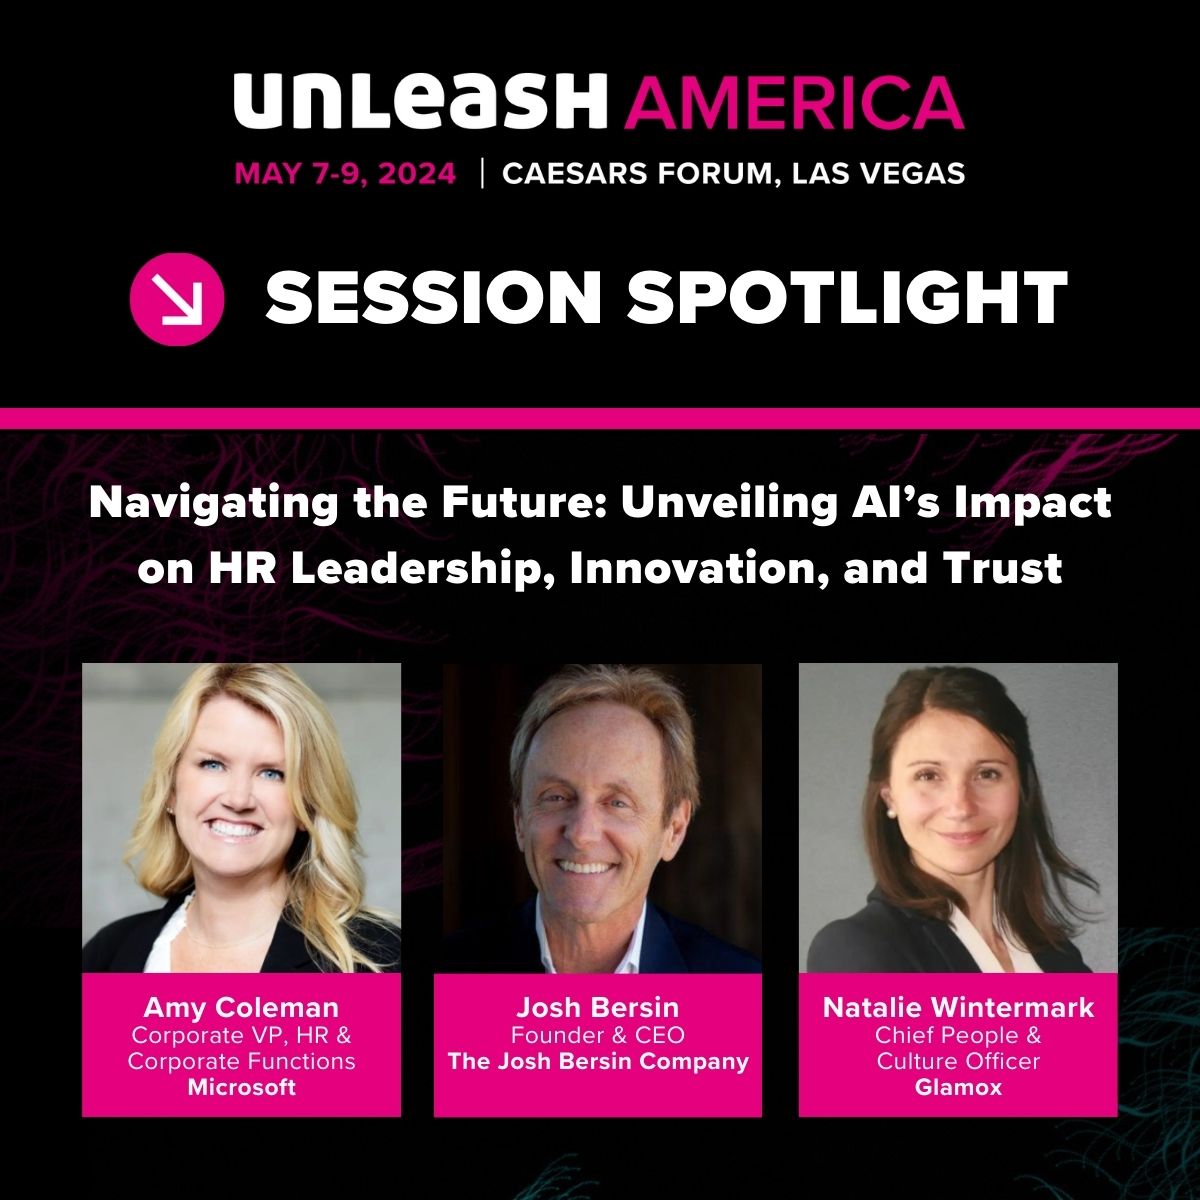 Join this #UNLEASHAMERICA panel to learn everything about building an AI-powered HR landscape using real-world cases: bit.ly/3x87sCo -Amy Coleman, @Microsoft -@Josh_Bersin, The Josh Bersin Company -Natalie Wintermark, Glamox -Moderated by Gary Bolles, @Singularityu